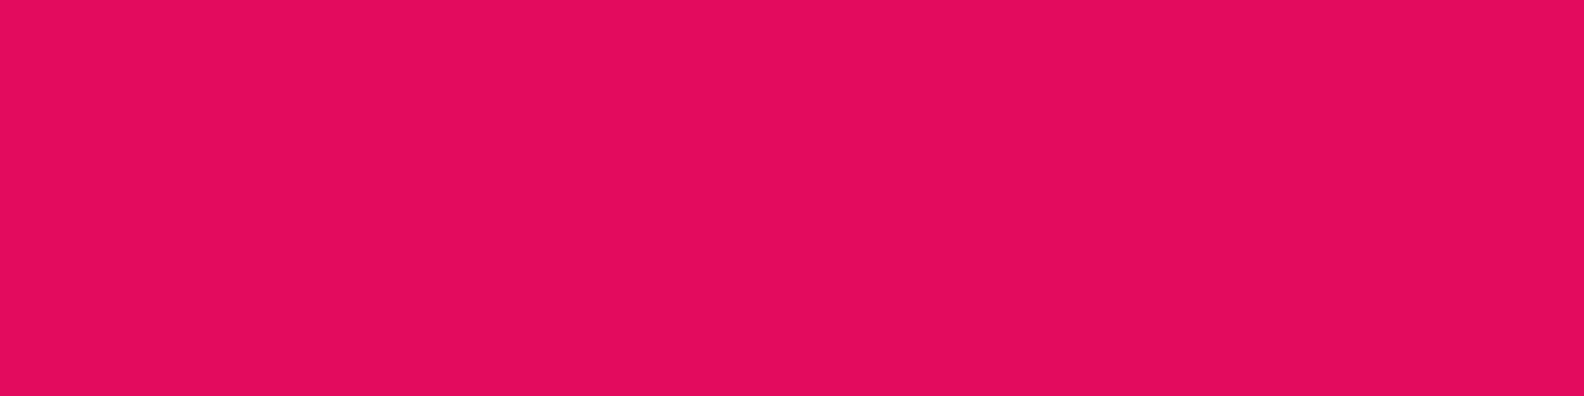 1584x396 Raspberry Solid Color Background